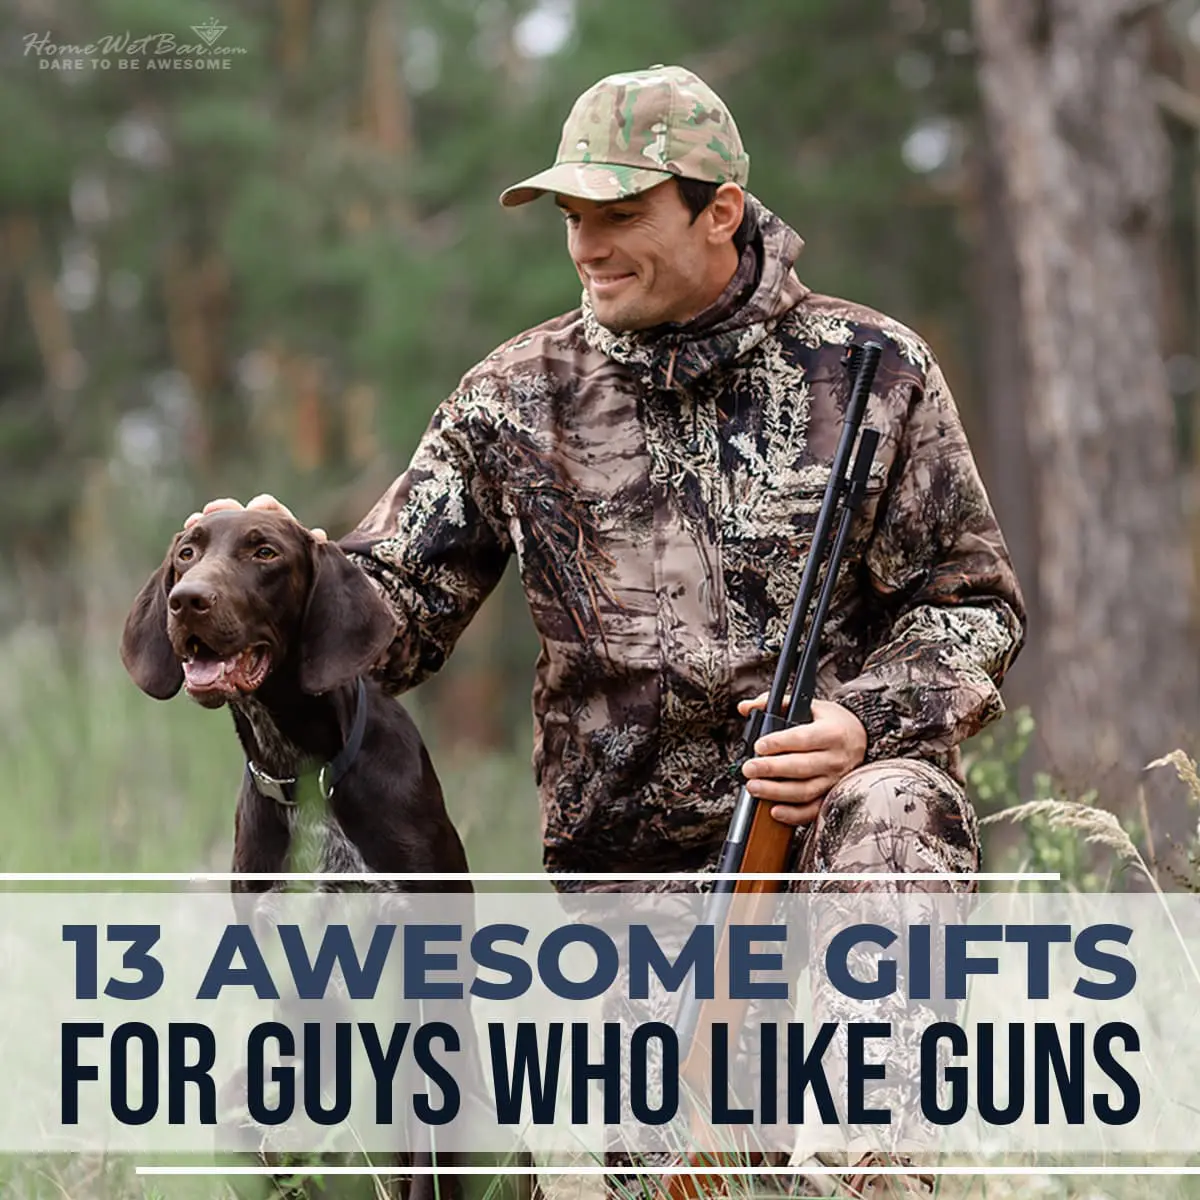 13 Awesome Gifts for Guys Who Like Guns